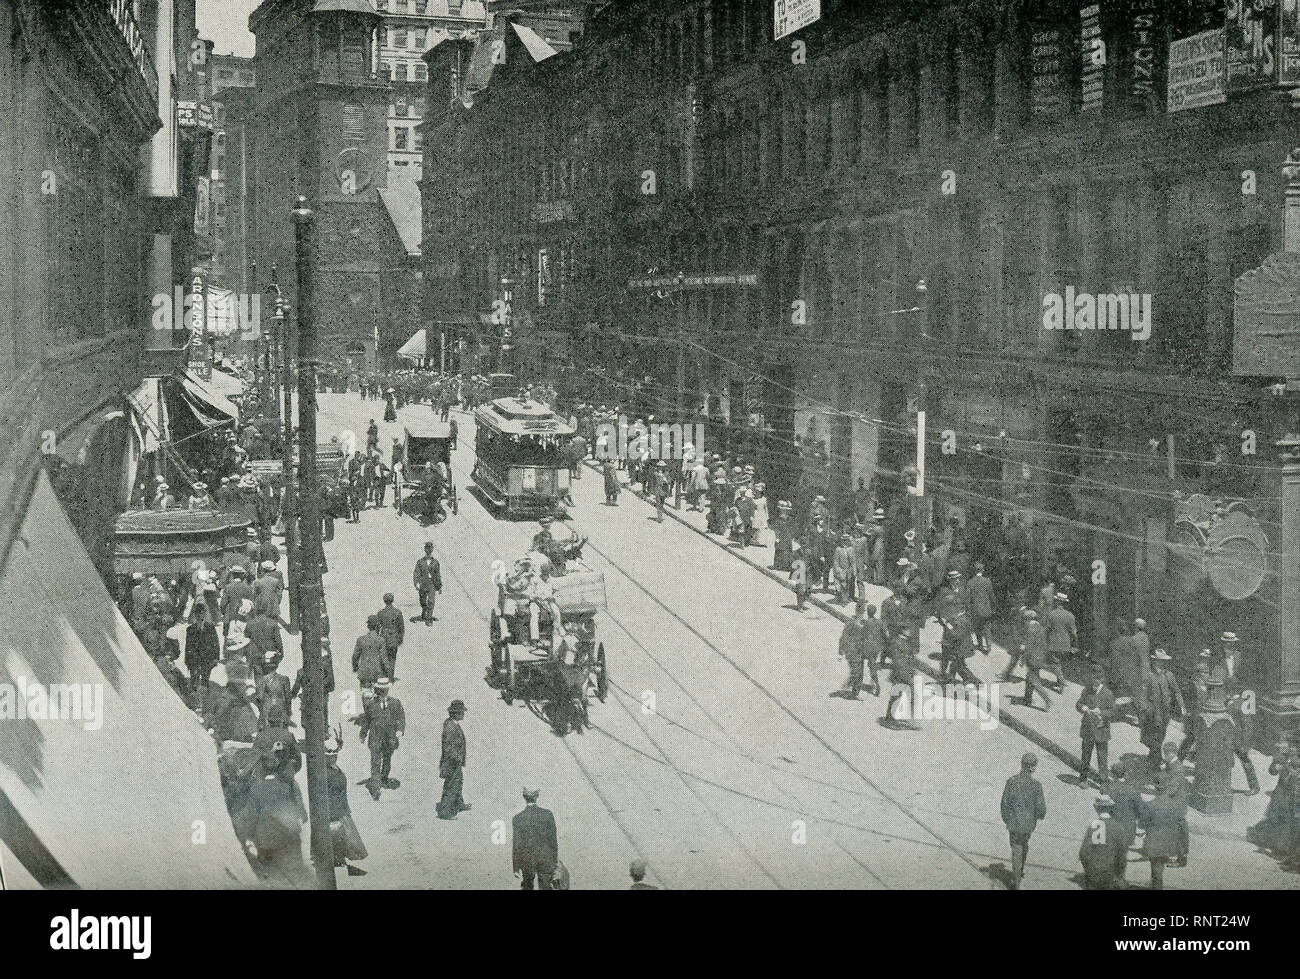 This photo dates to 1922 and shows Washington Street in Boston, Massachusetts. The caption reads: The Principal business street of Boston, named in honor of General Washington when the Continental troops occupied the city in 1776, after the withdrawal of the British forces. On this thoroughfare are located many of the largest business houses, finest theatres, ands the great newspaper offices. The daily traffic is enormous. Stock Photo